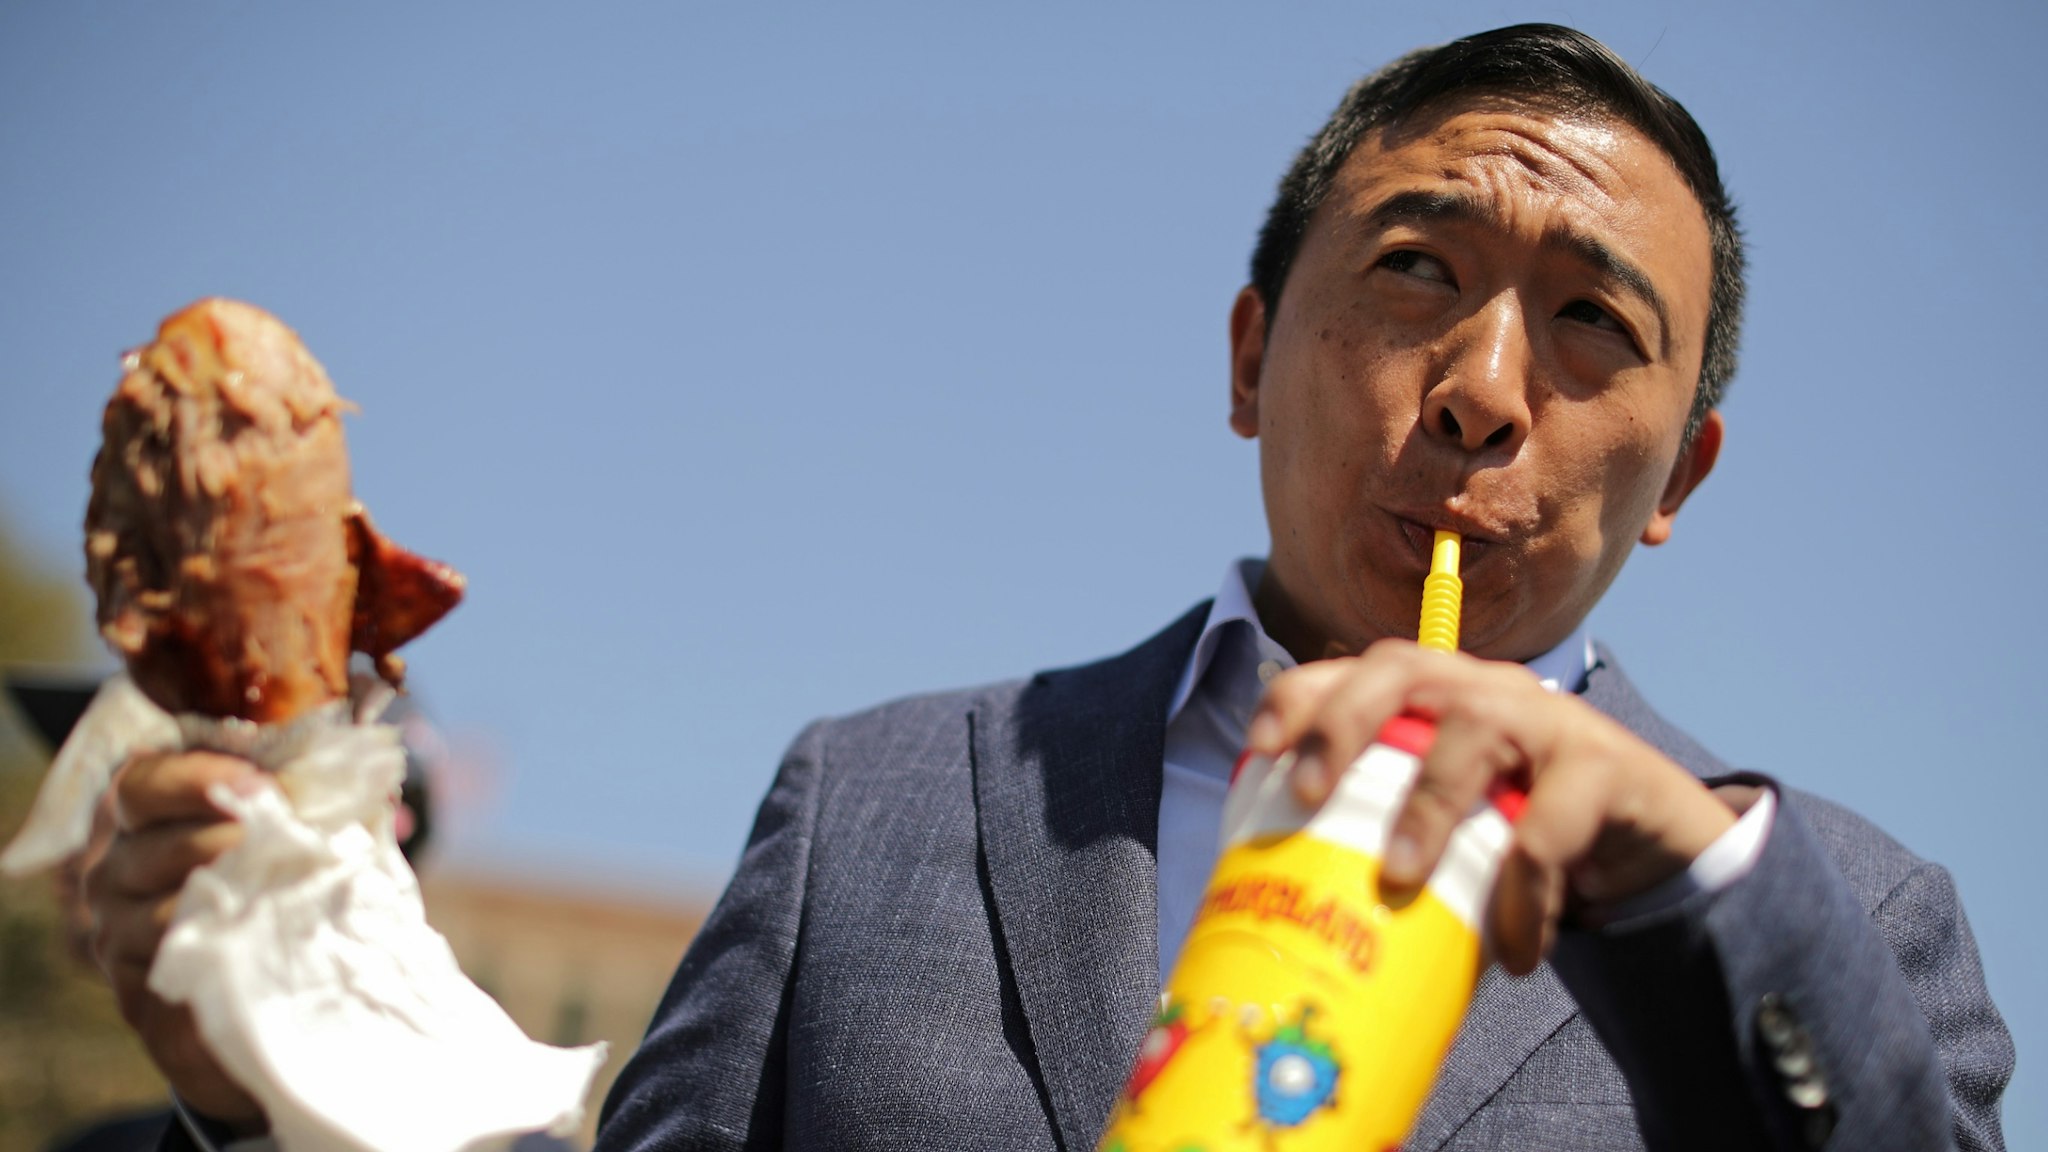 Democratic presidential candidate Andrew Yang eats a roasted turkey leg while visiting the Iowa State Fair August 09, 2019 in Des Moines, Iowa.